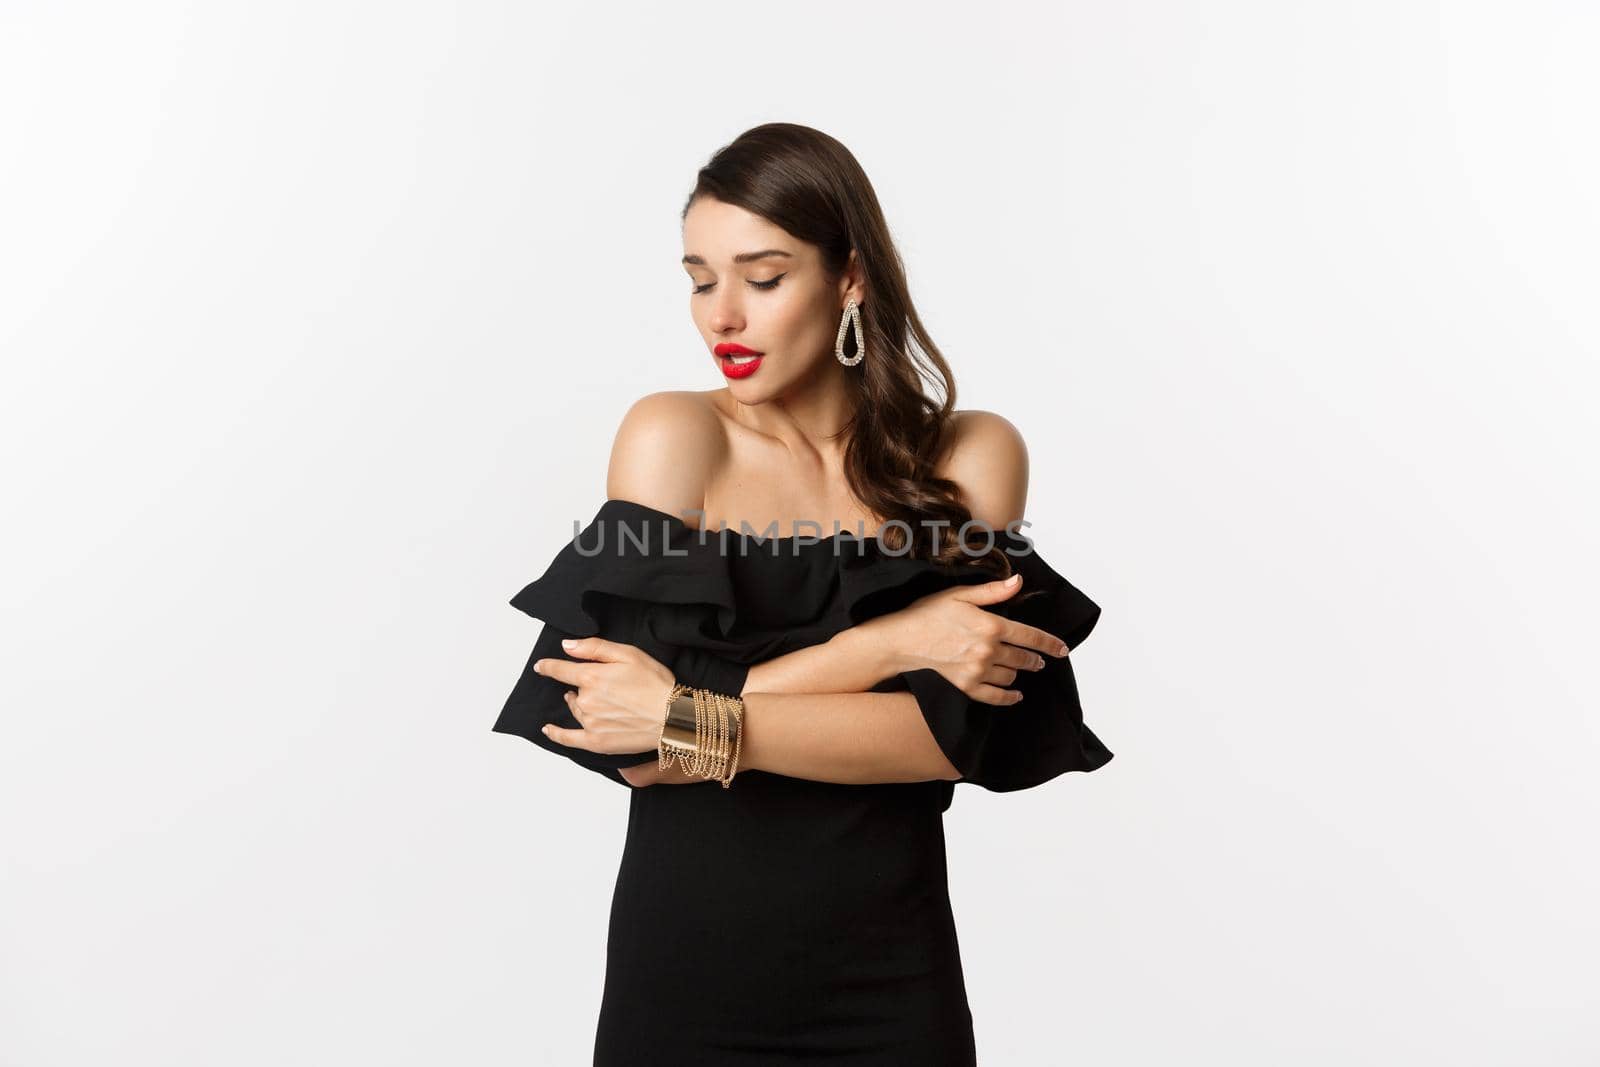 Beauty and fashion concept. Sensual and attractive woman in black dress and red lips, hugging herself and gently looking down, standing over white background.